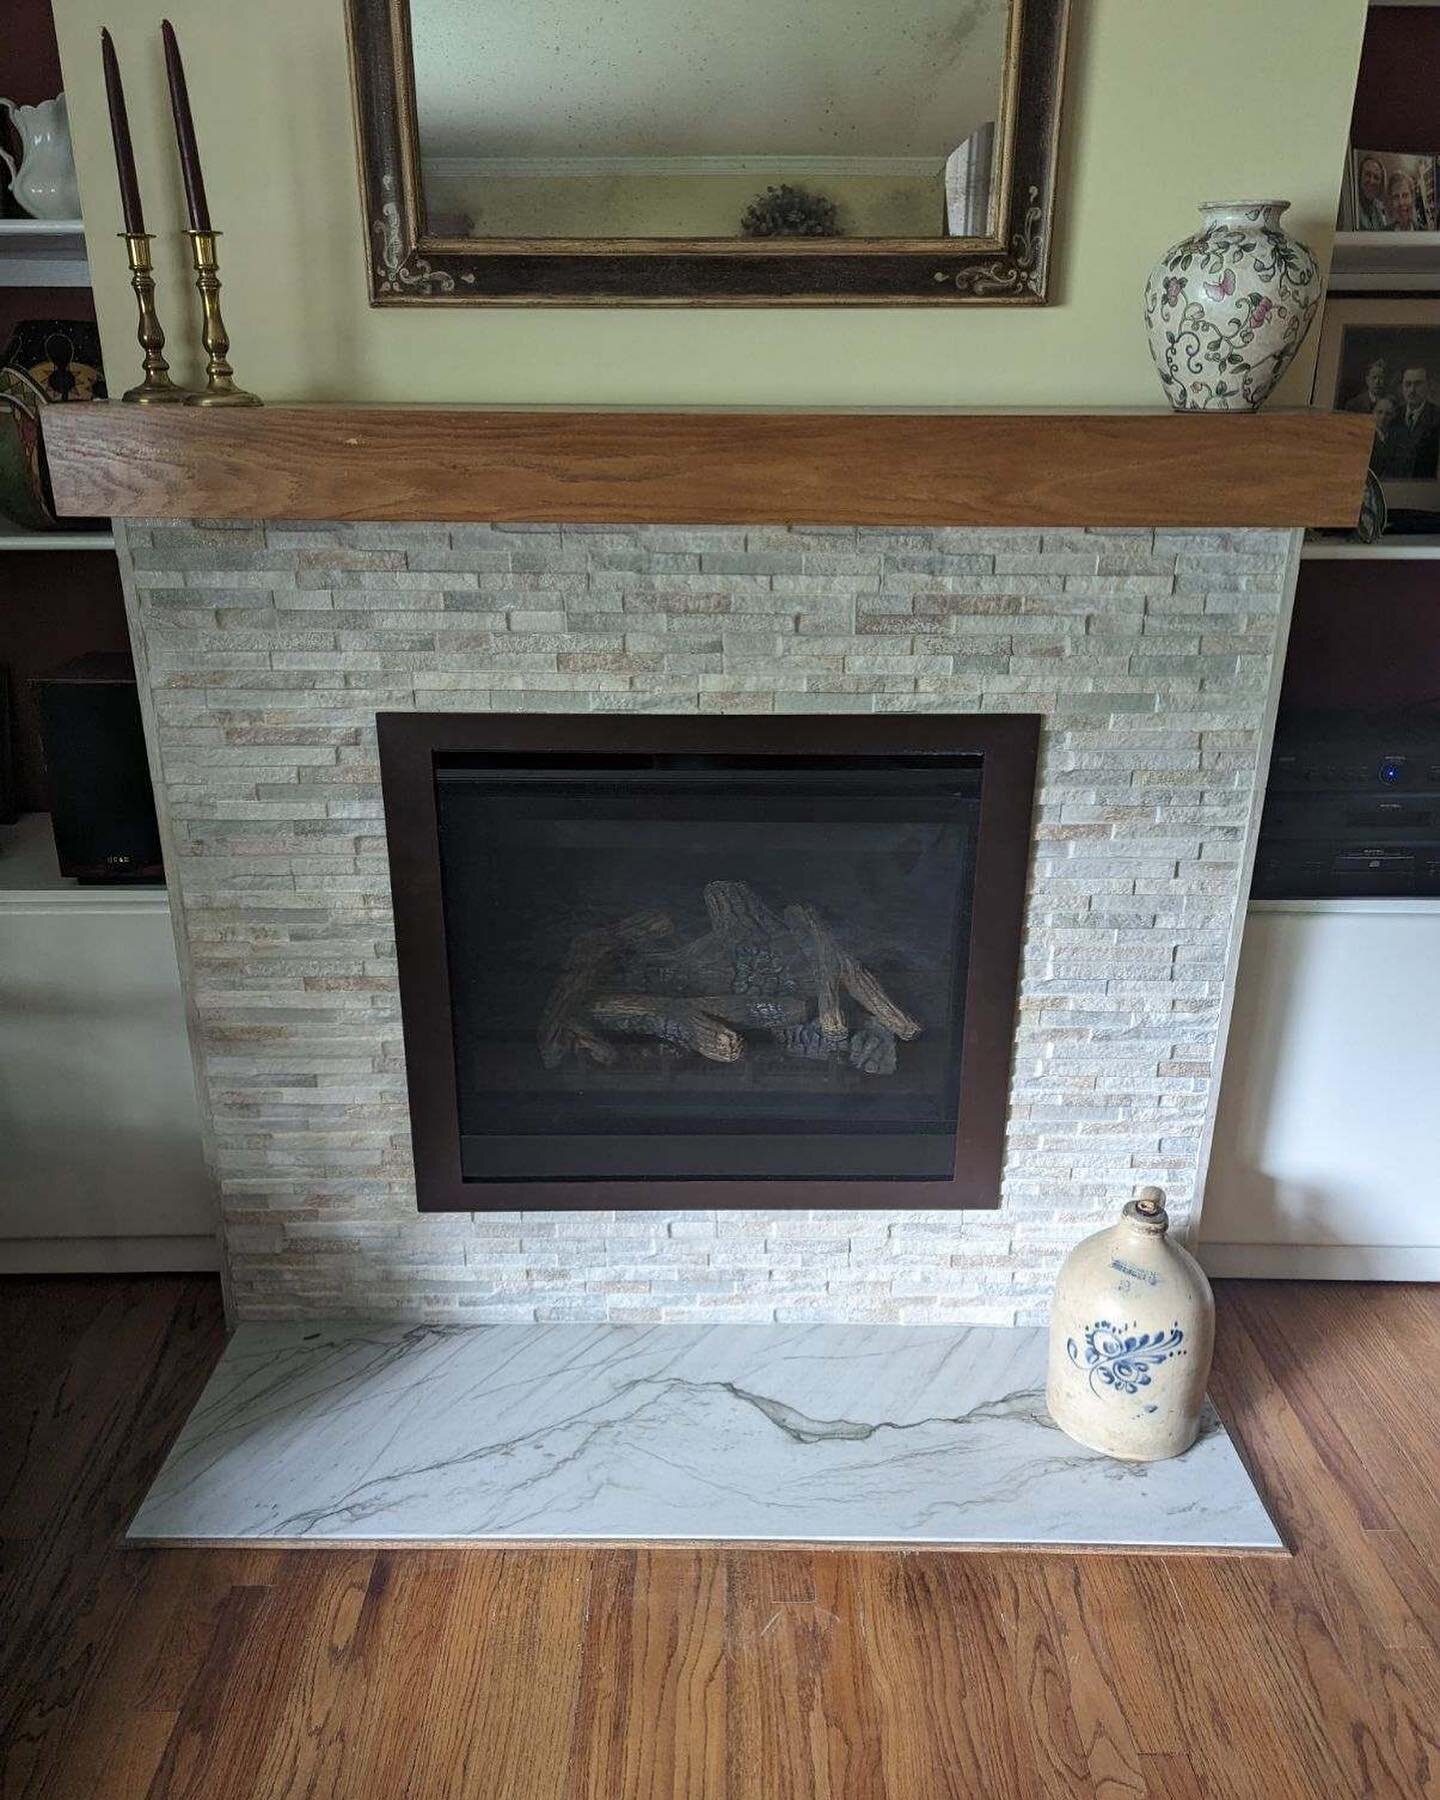 Nice fireplace! Porcelain ledgers on the fireplace surround with an absolutely beautiful, stunning Quartzsite hearth!!!😊💜